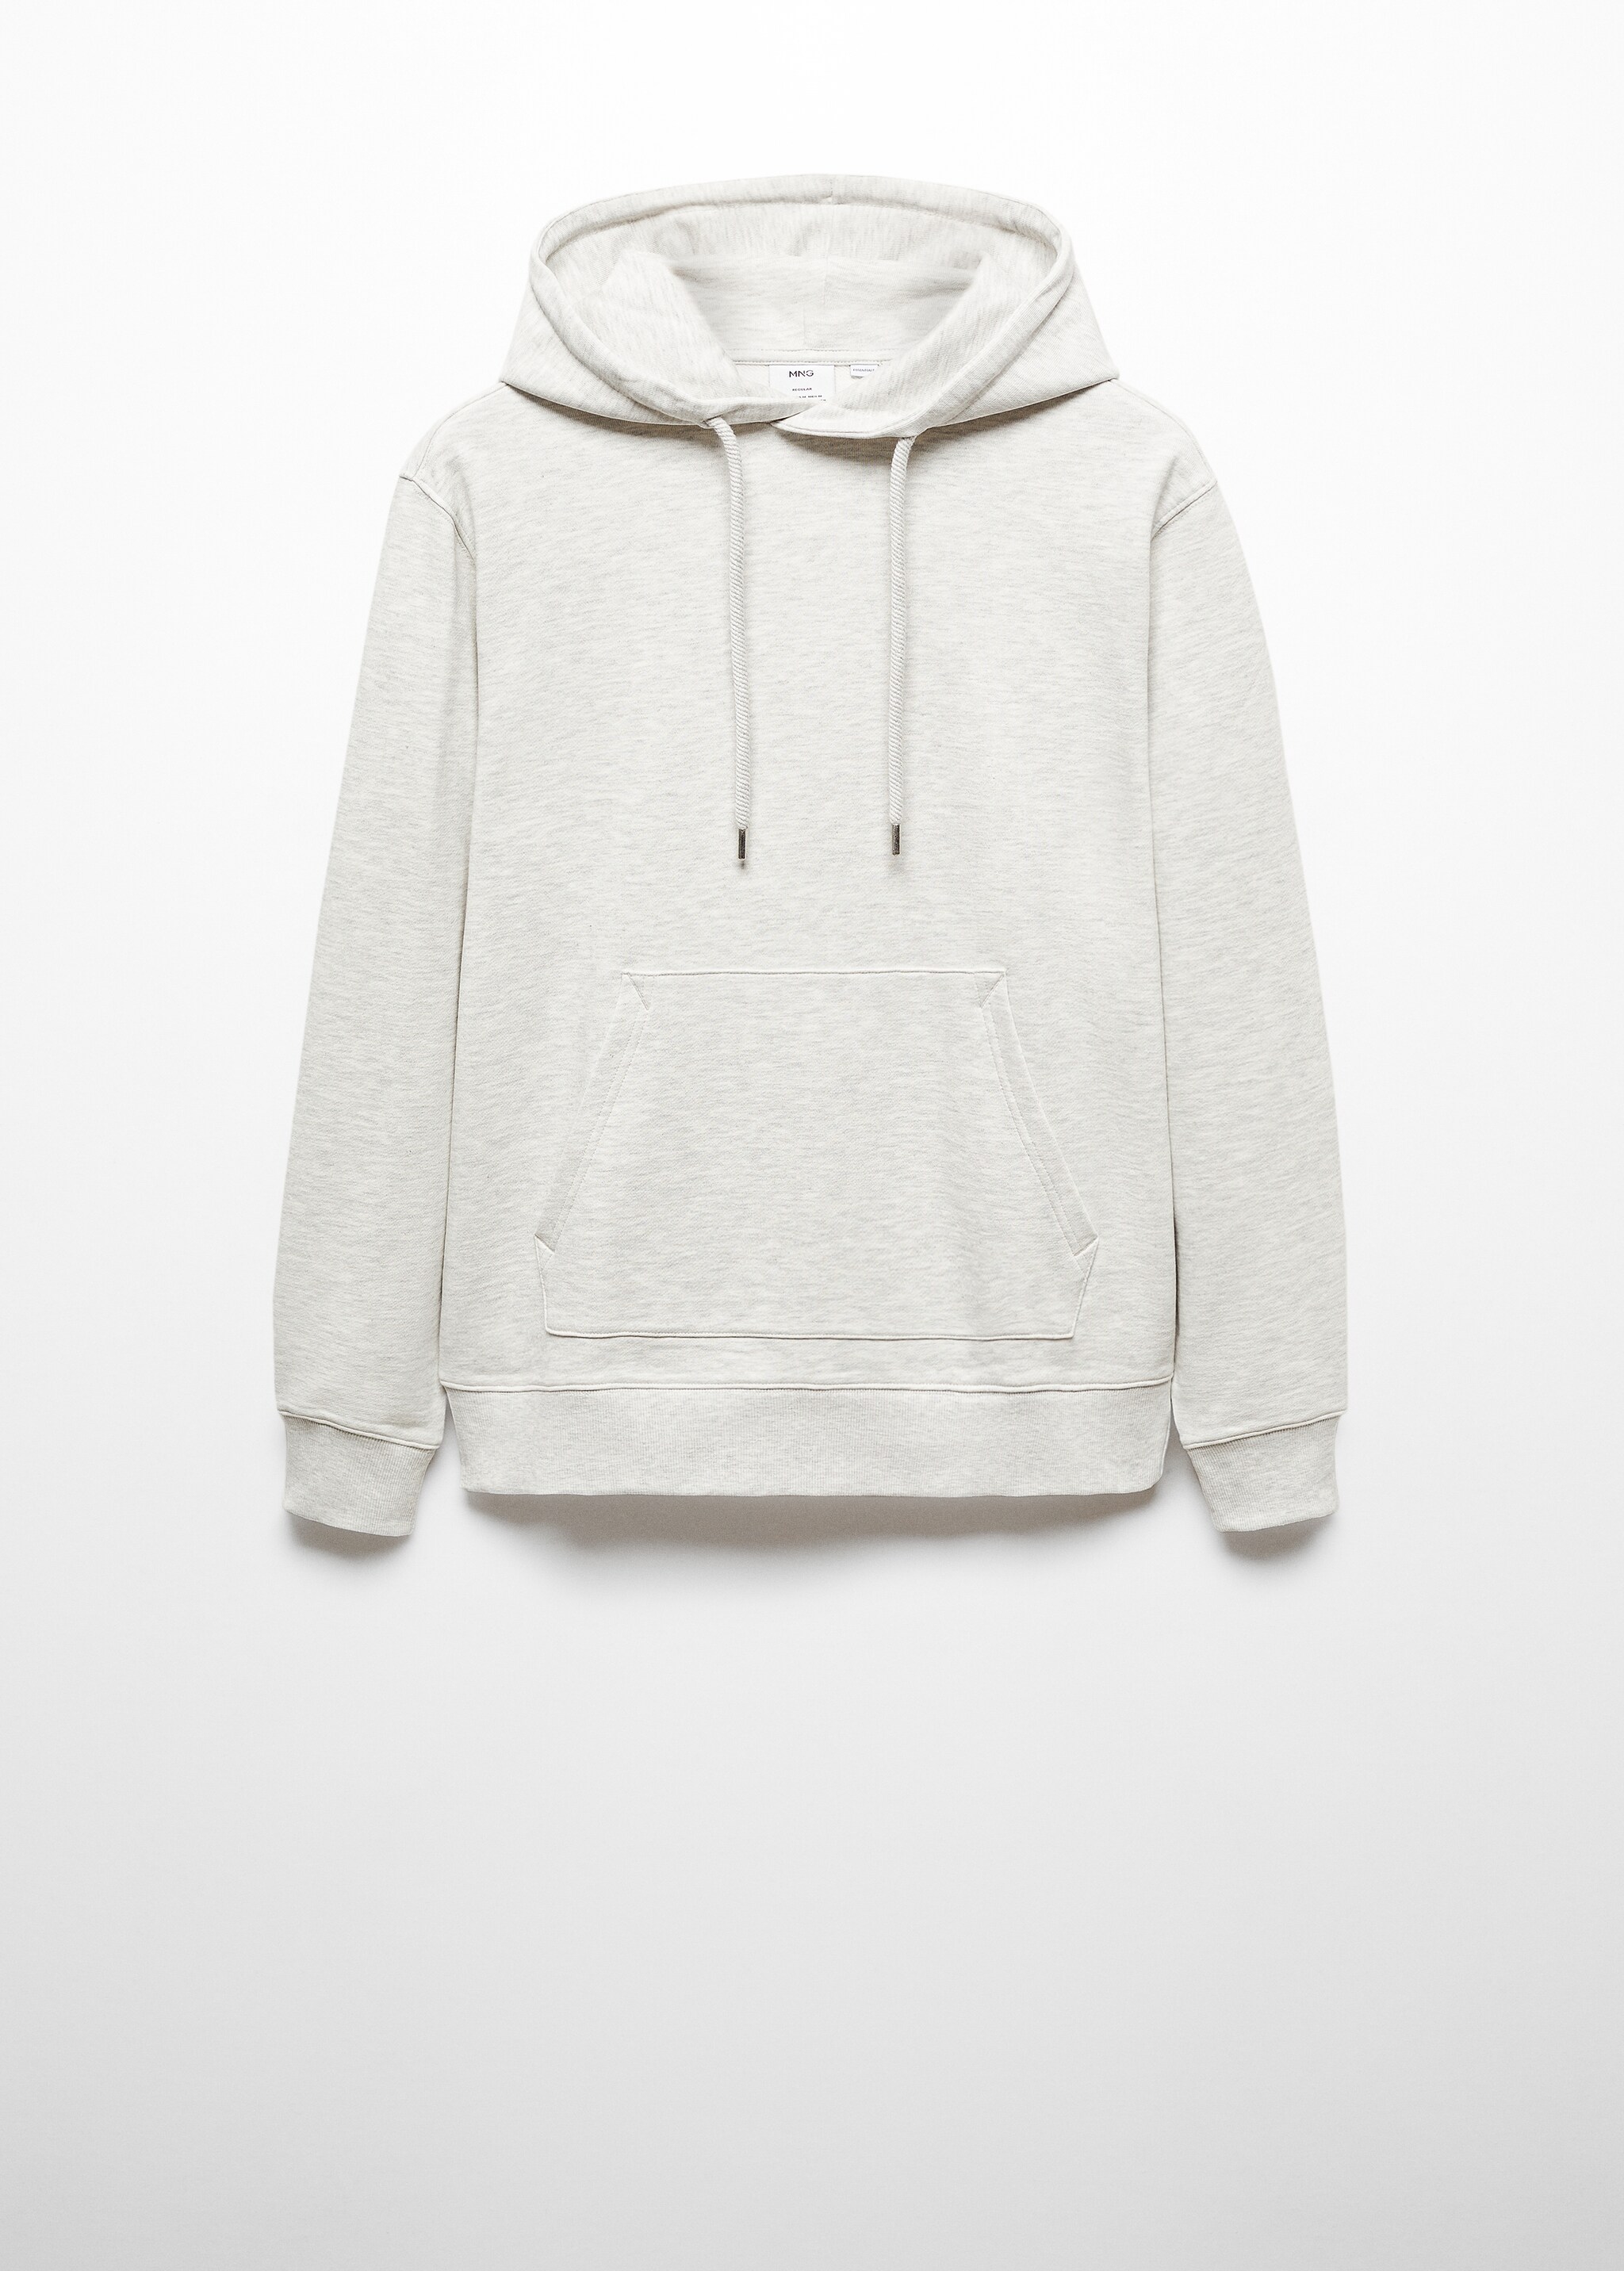 Lightweight cotton hooded sweatshirt - Article without model